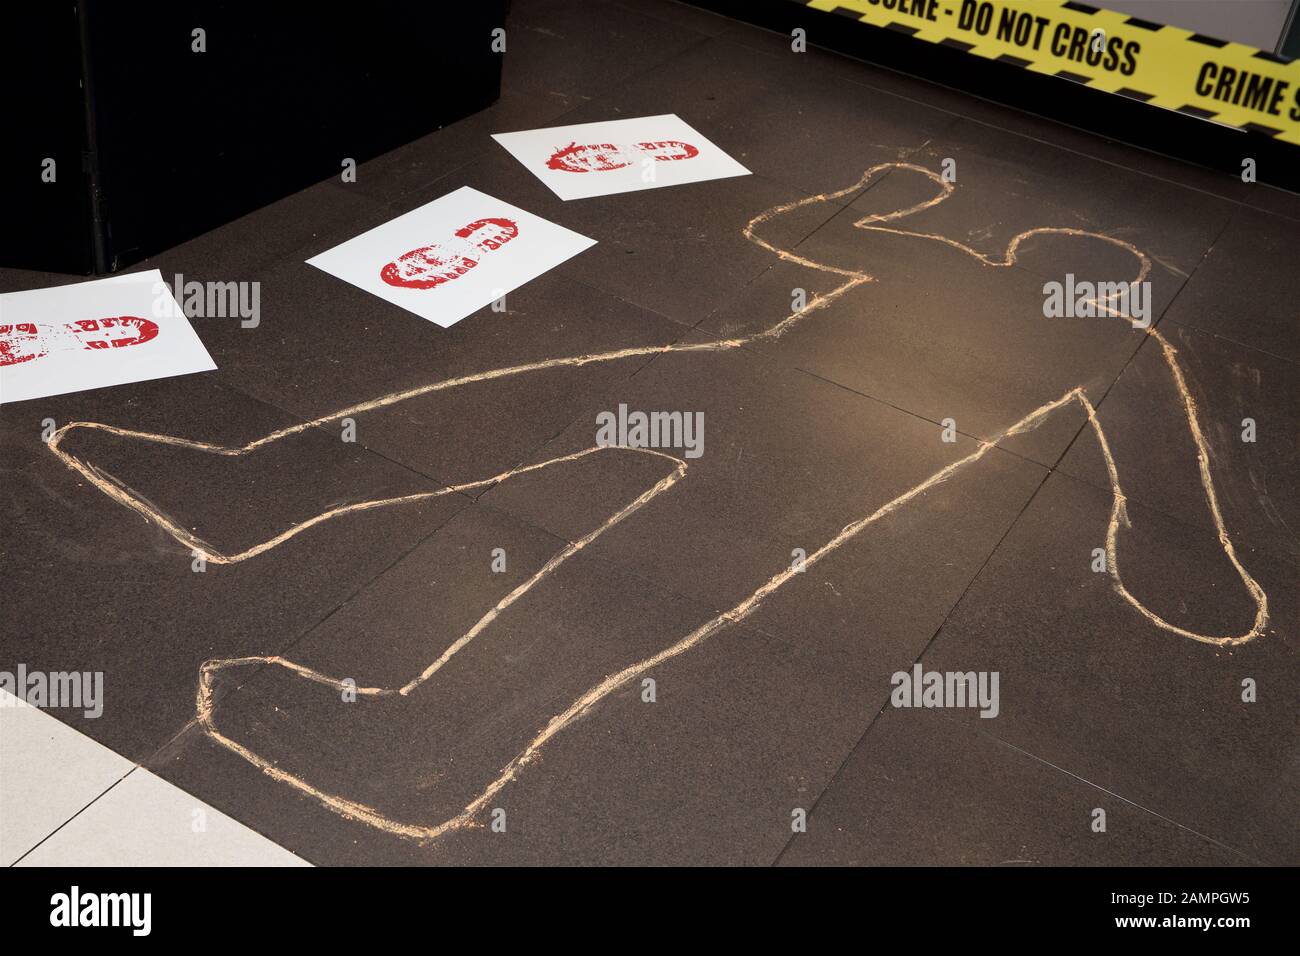 Mock crime scene with yellow police cordon ribbon and chalk body outline. Stock Photo